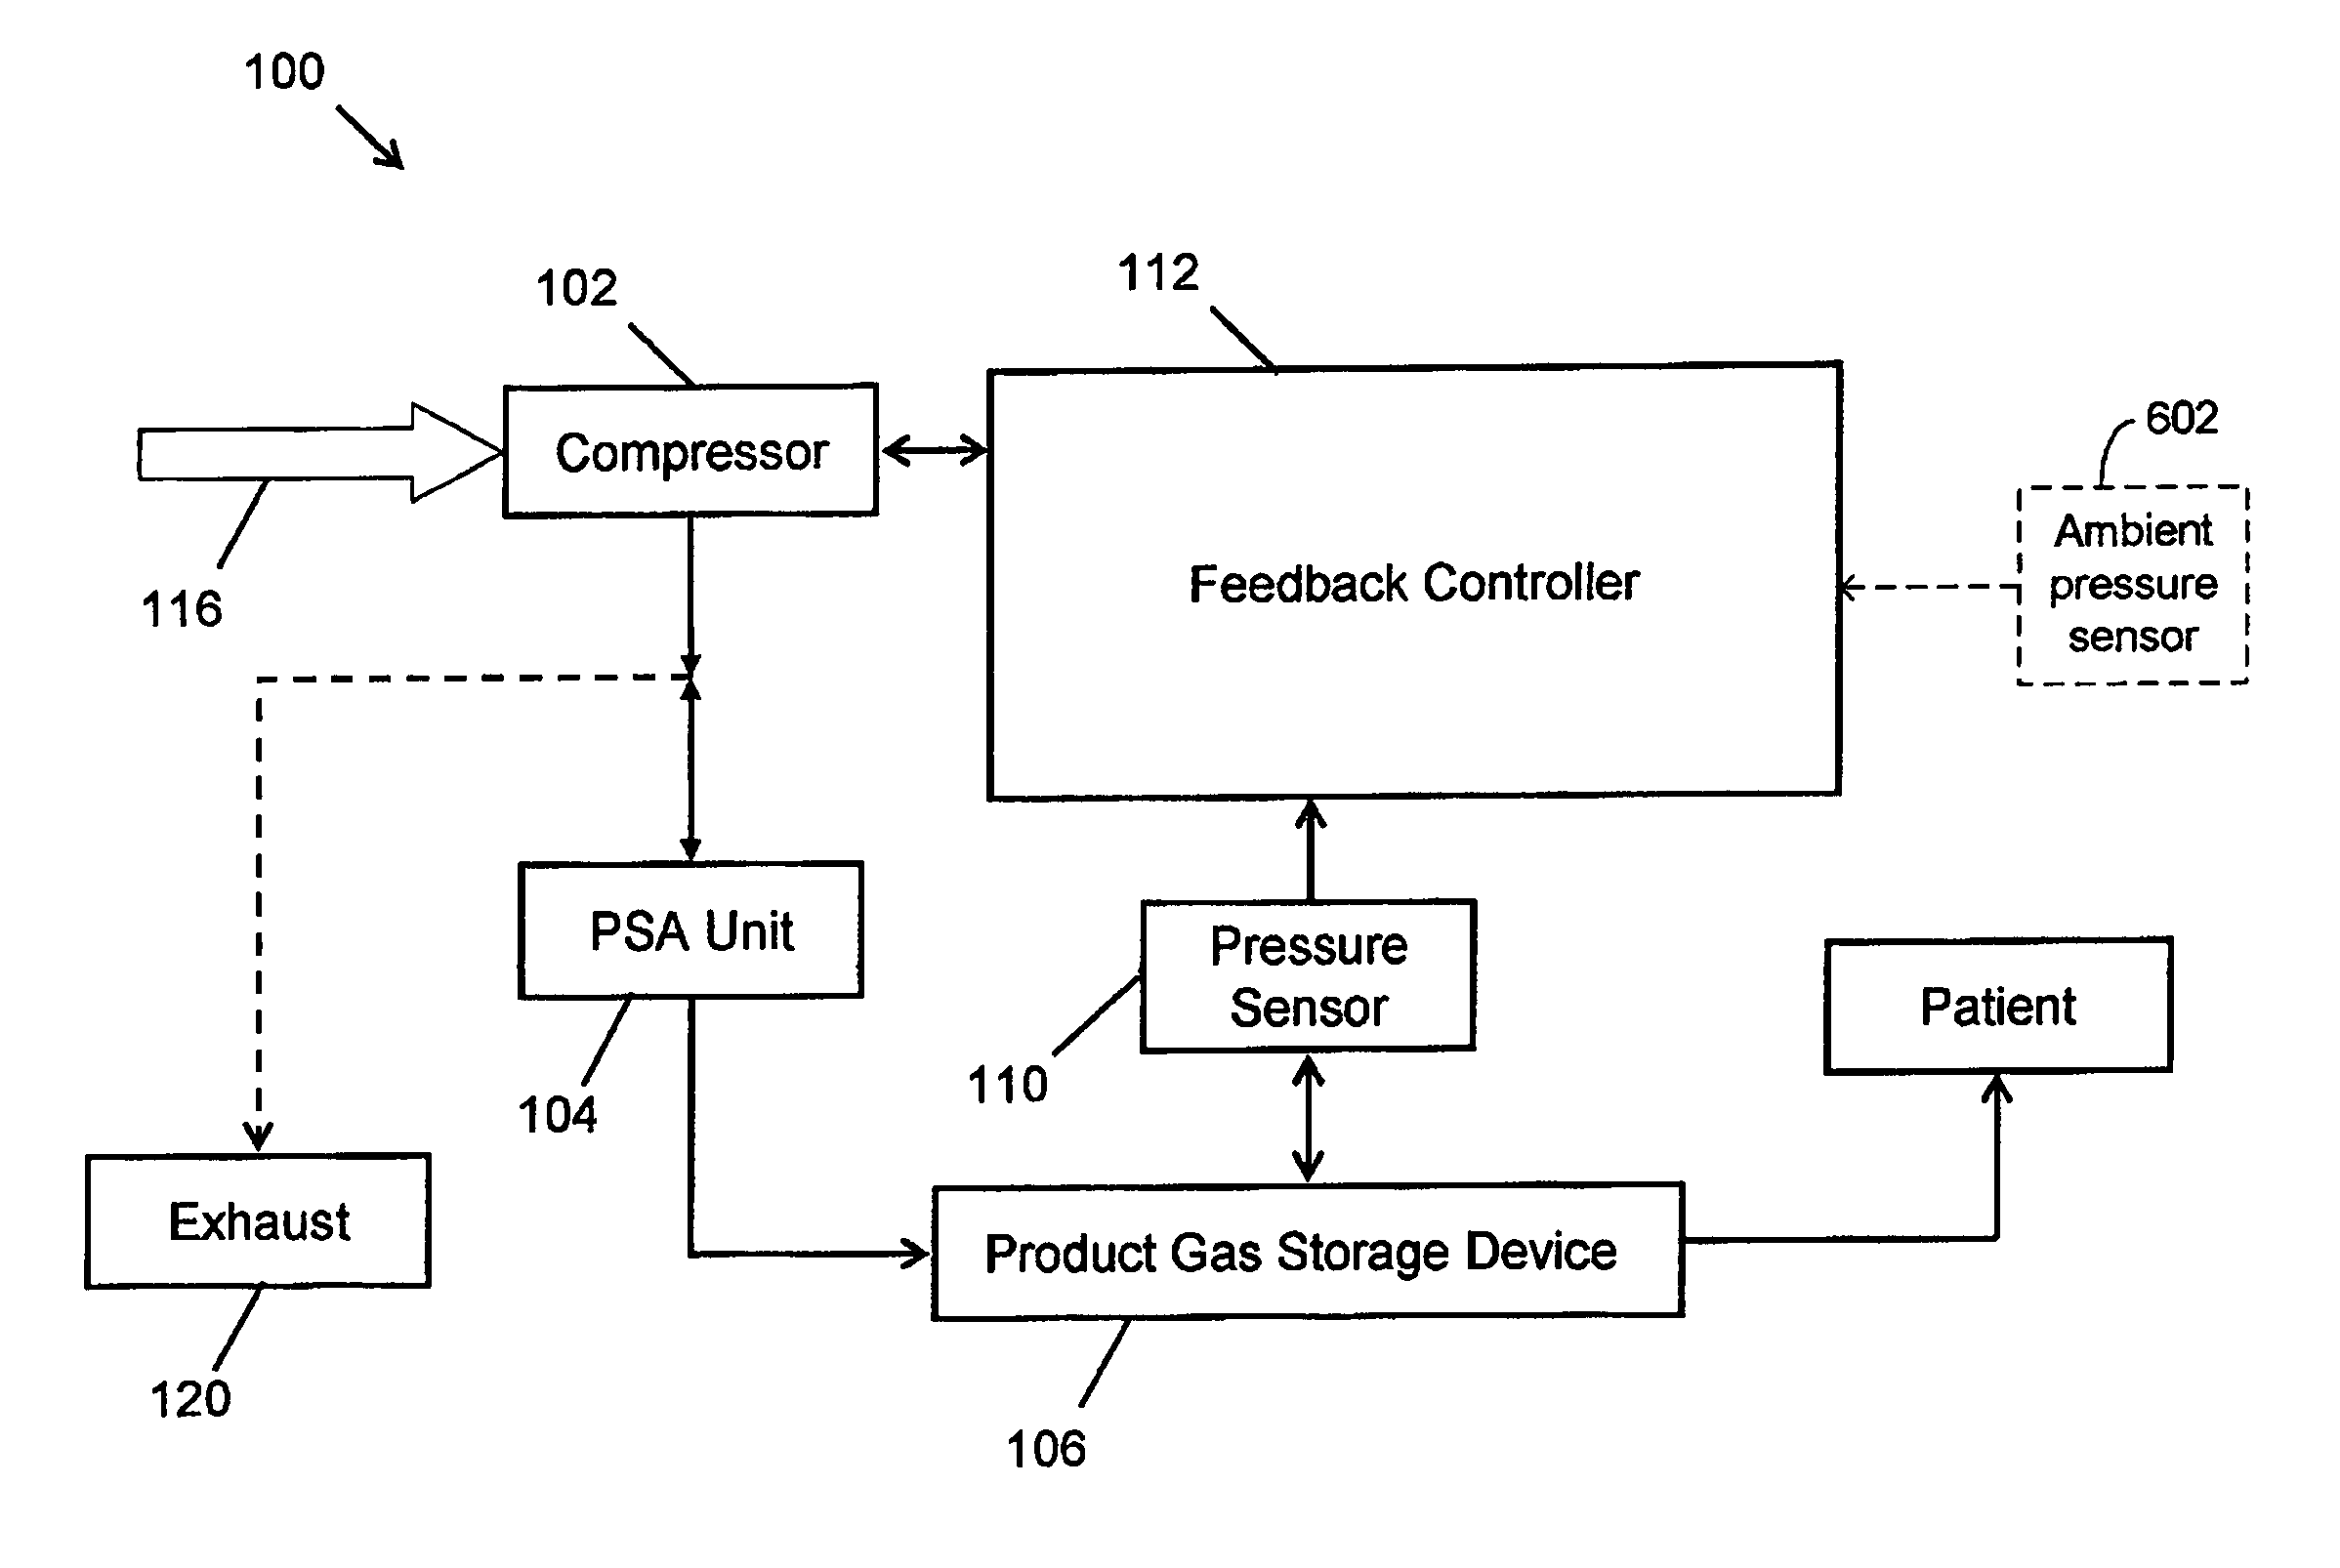 Systems and methods of monitoring and controlling the performance of a gas fractionalization apparatus